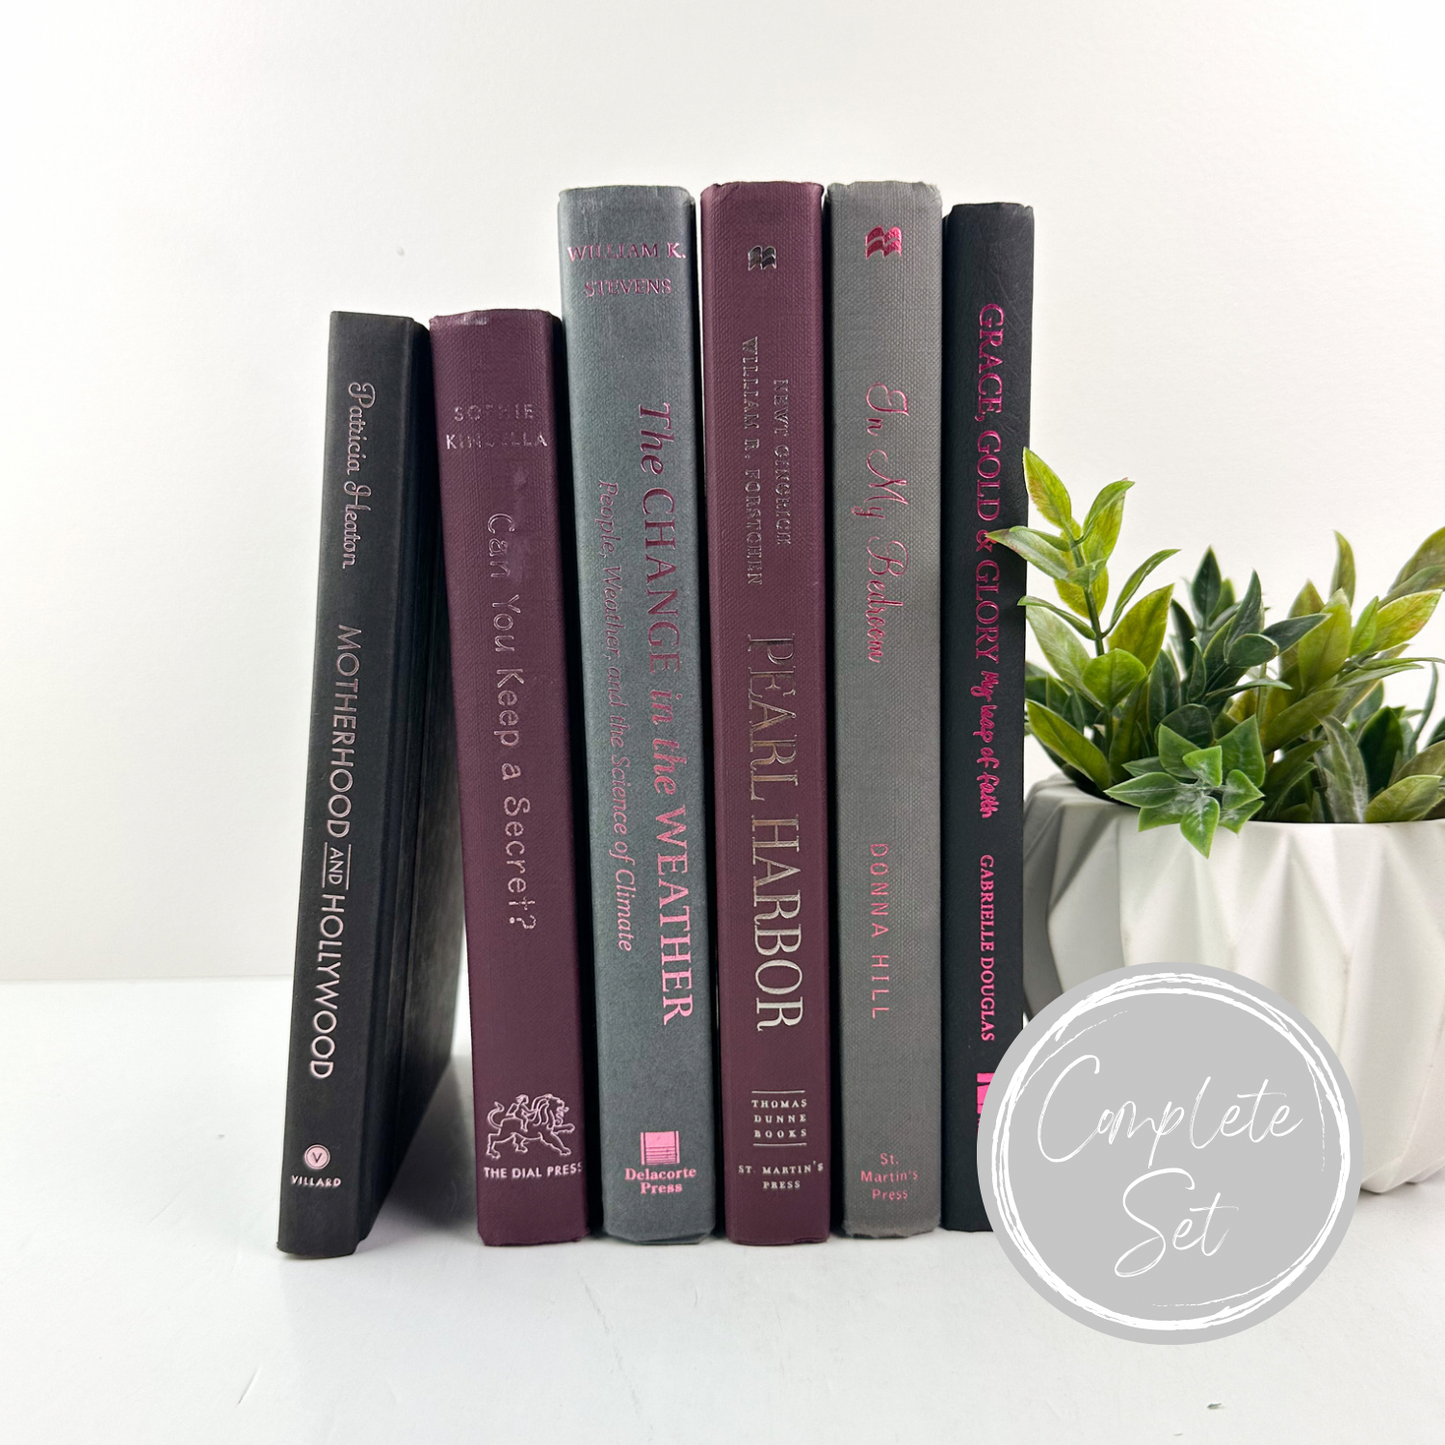 Maroon and Gray Books for Decoration